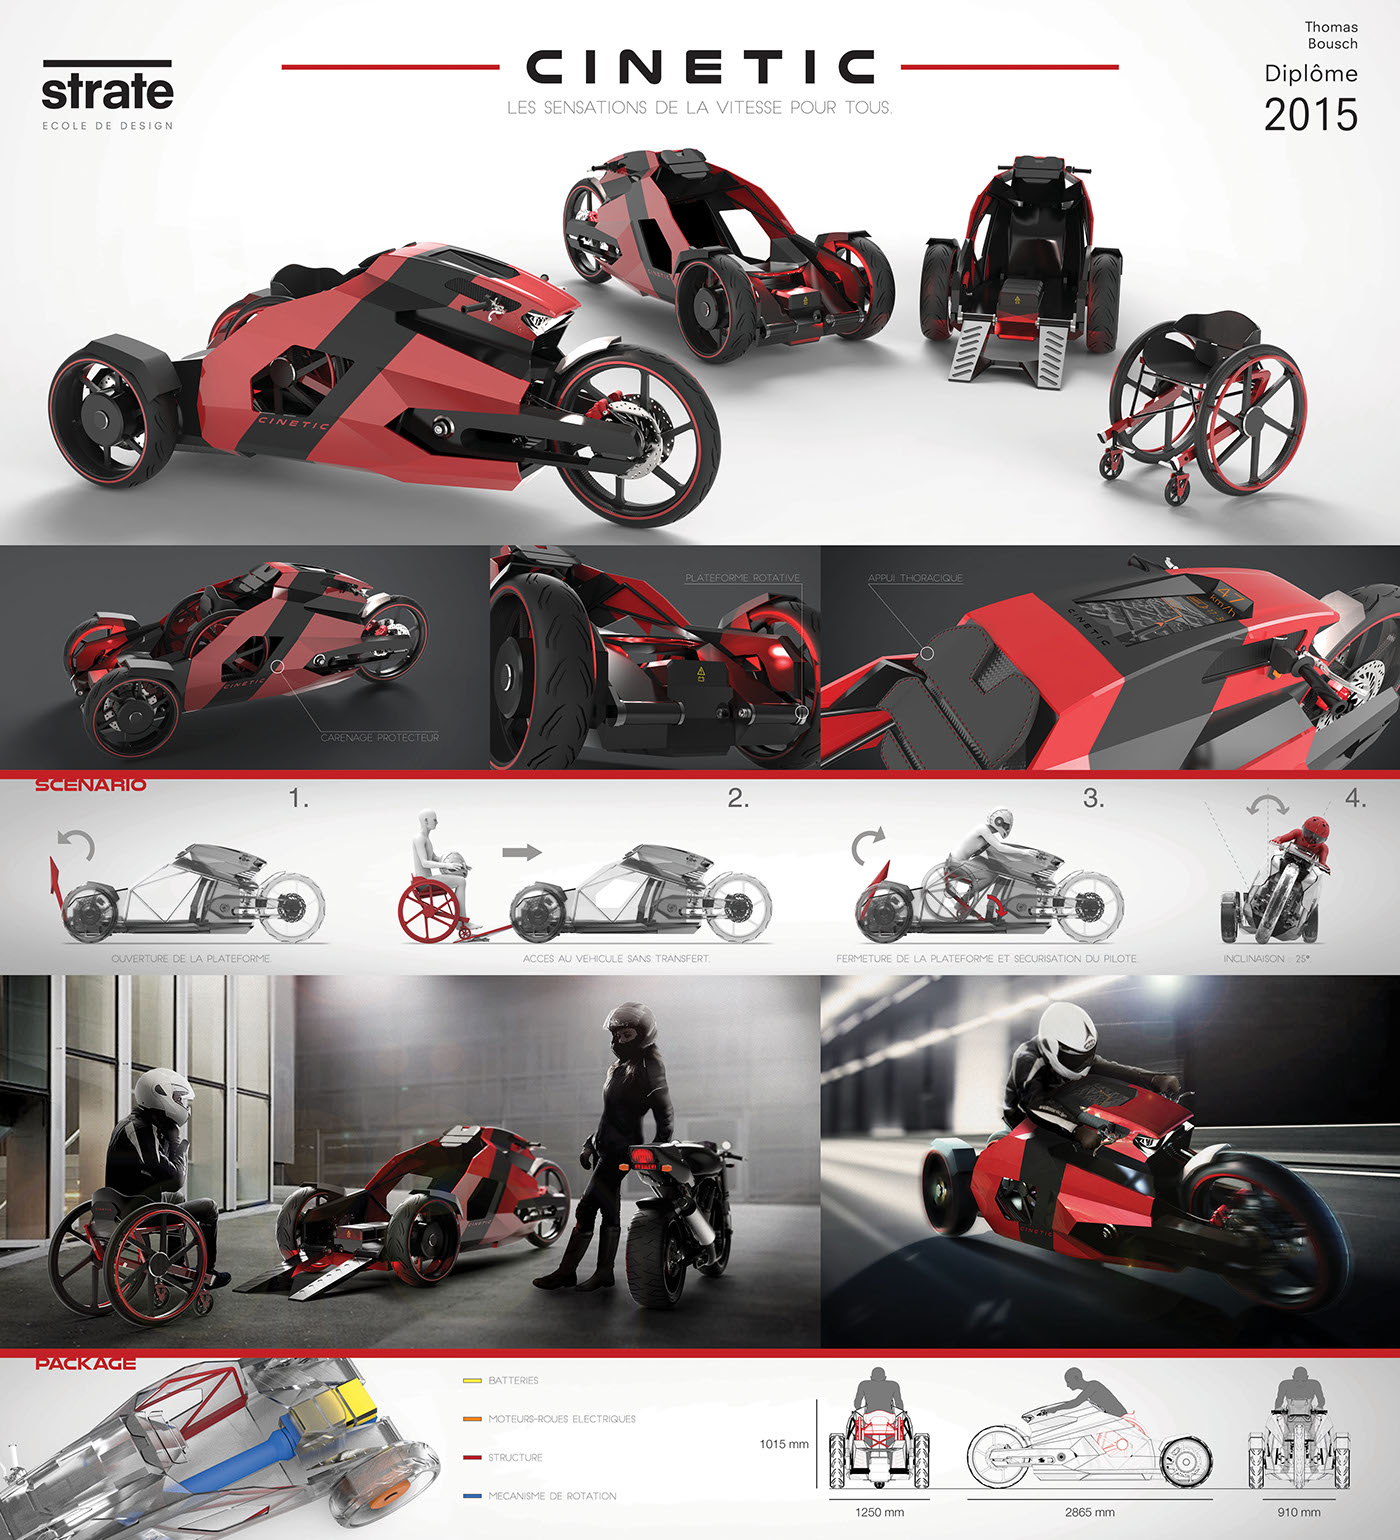 transportation three-wheeled vehicle strate diploma motorcycle Accessibility